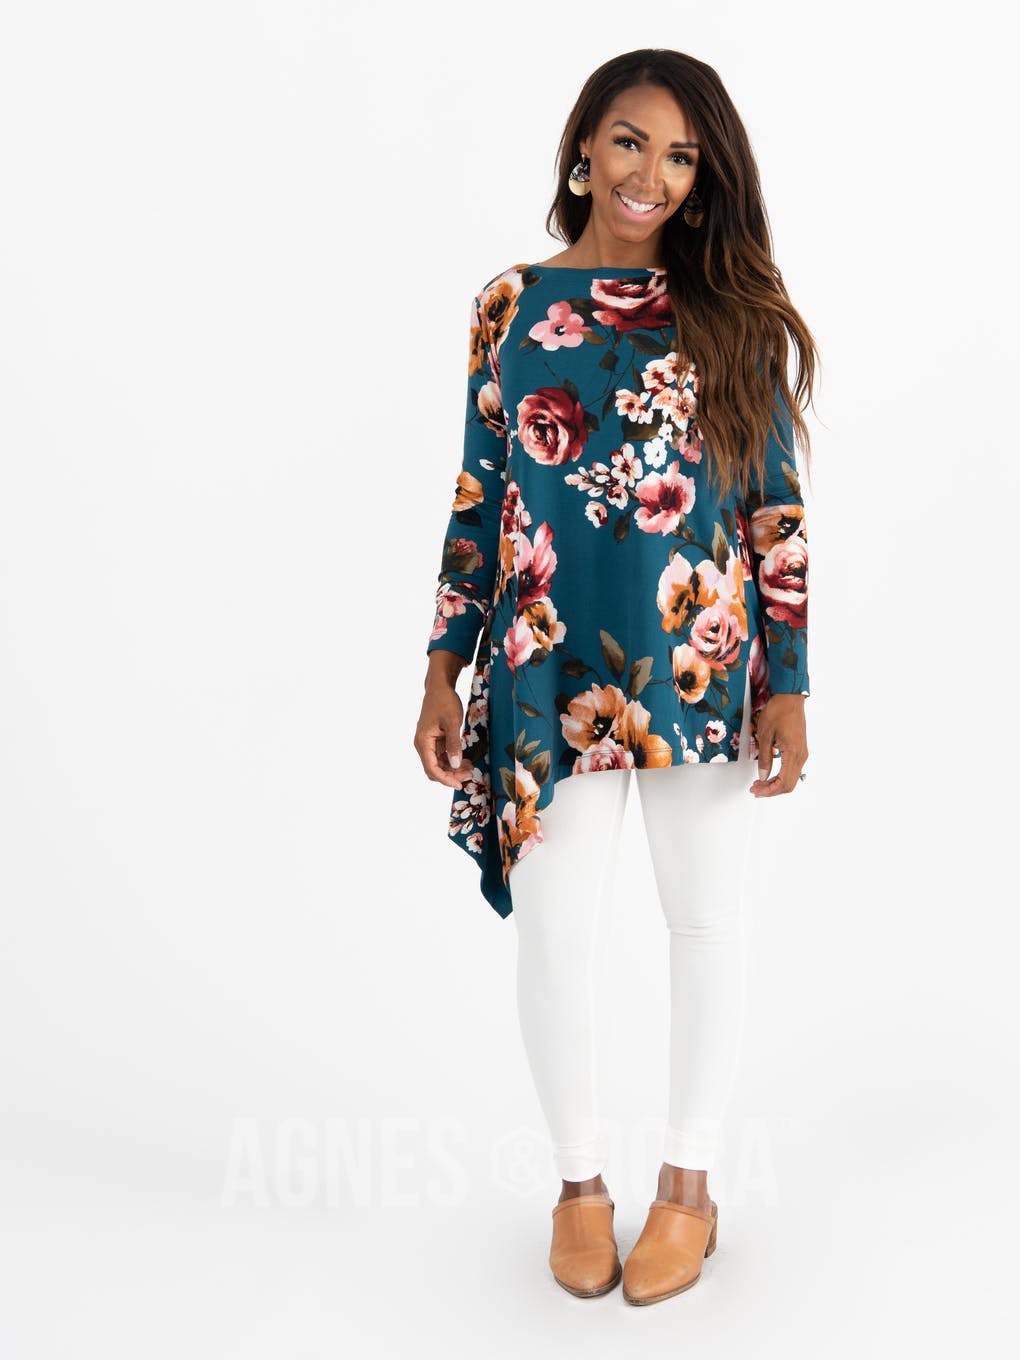 Asymmetrical Tunic Baby Suede Teal Based Floral Long Sleeve